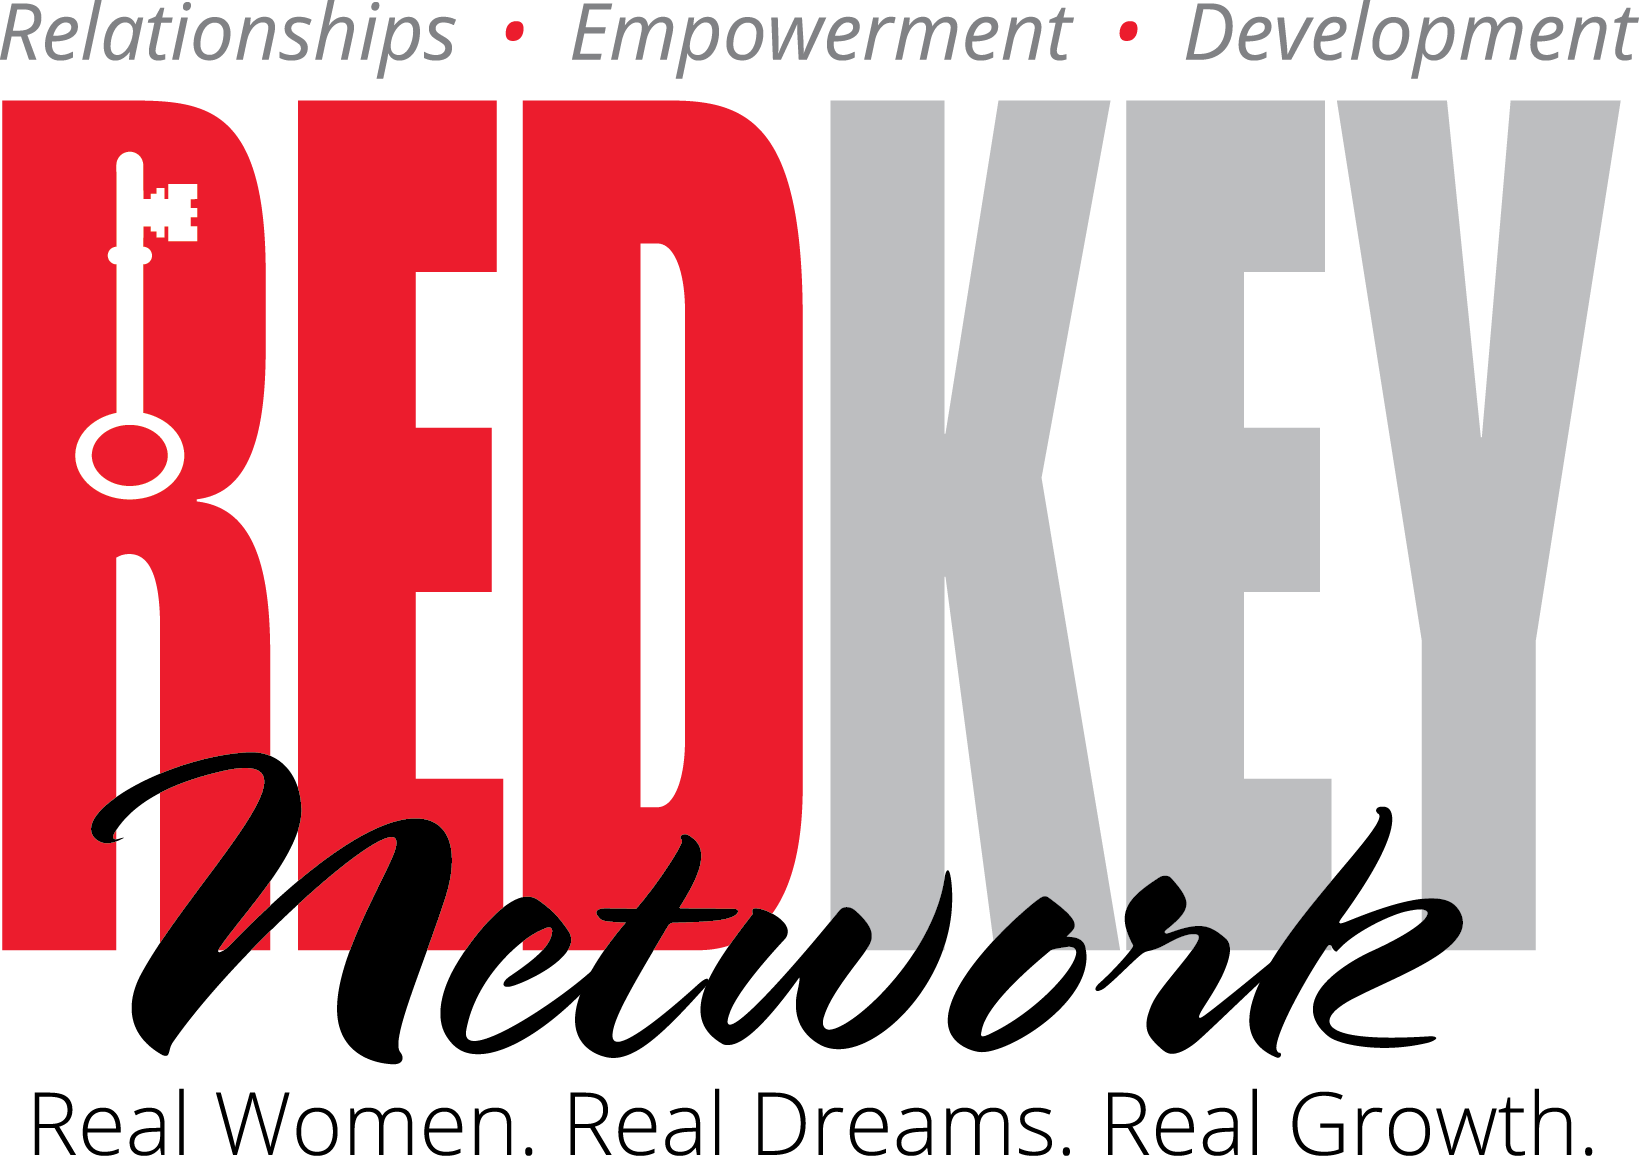 Profile with Red Oval Logo - Red Key Network public profile